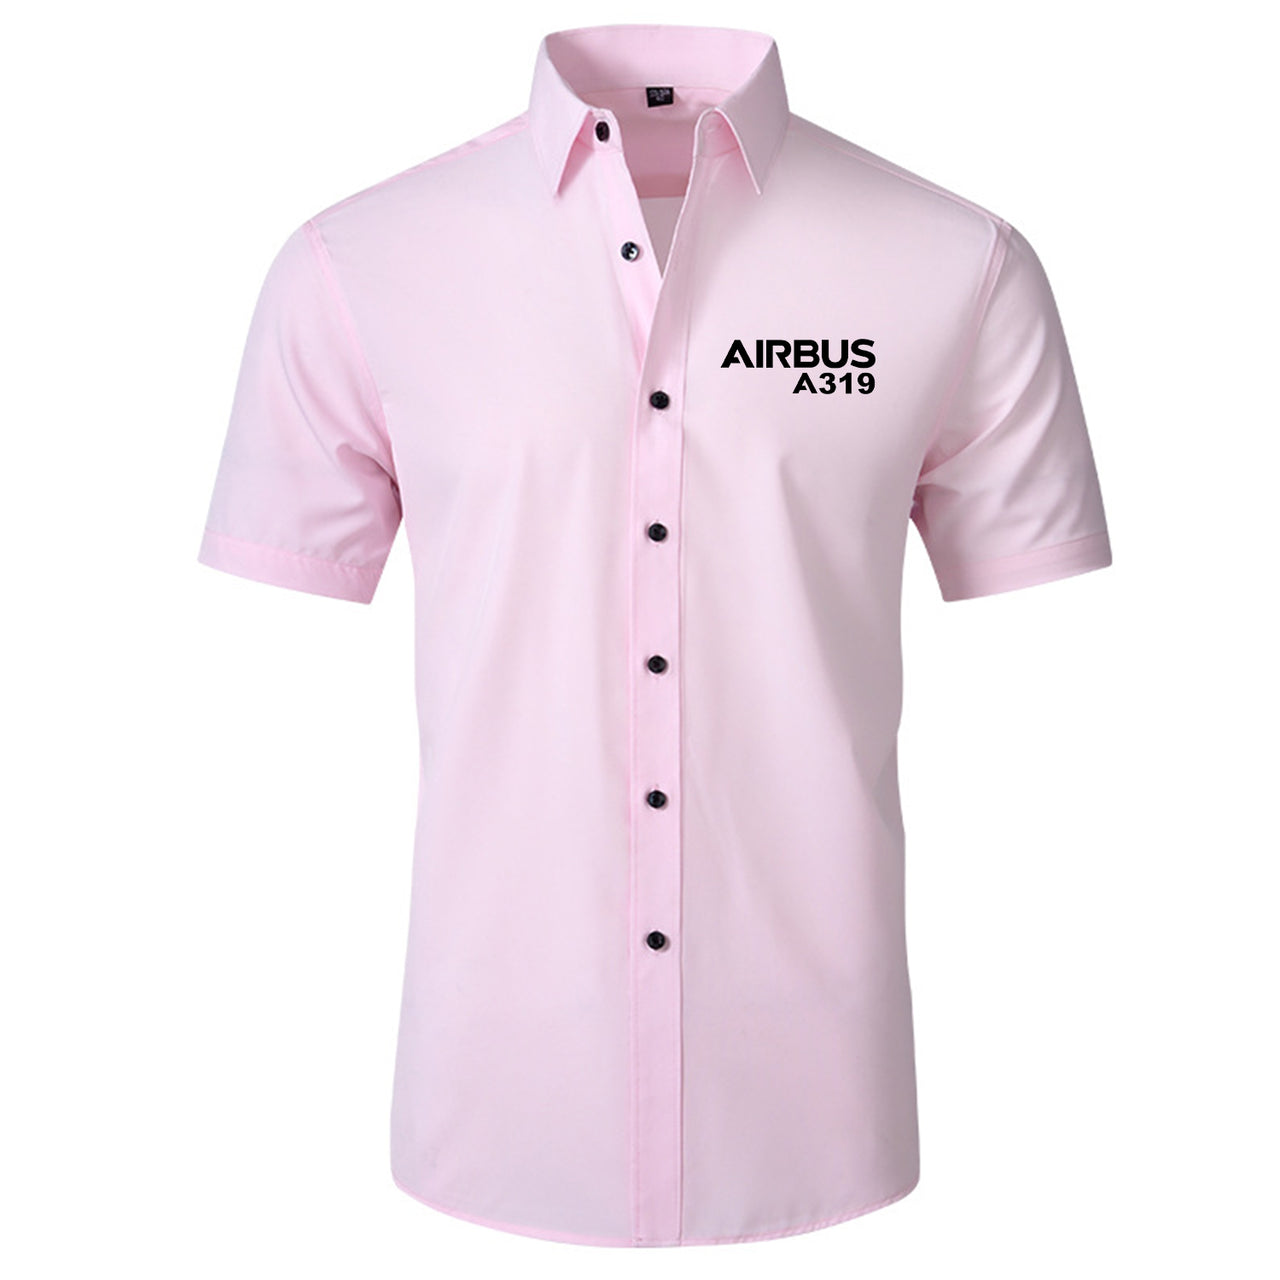 Airbus A319 & Text Designed Short Sleeve Shirts